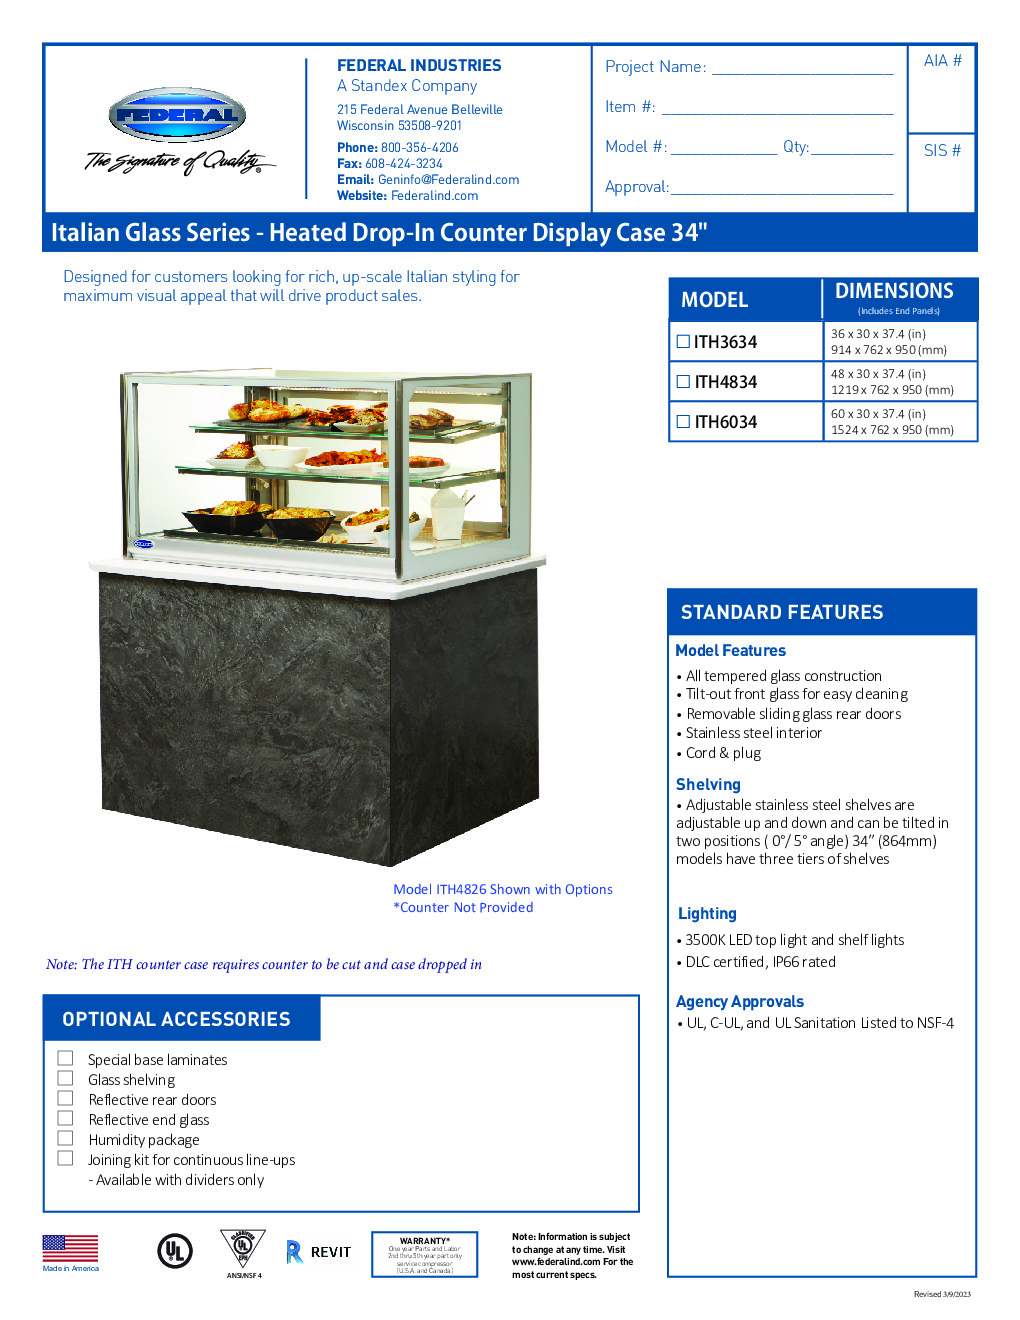 Federal Industries ITH6034 Drop-In Heated Display Case